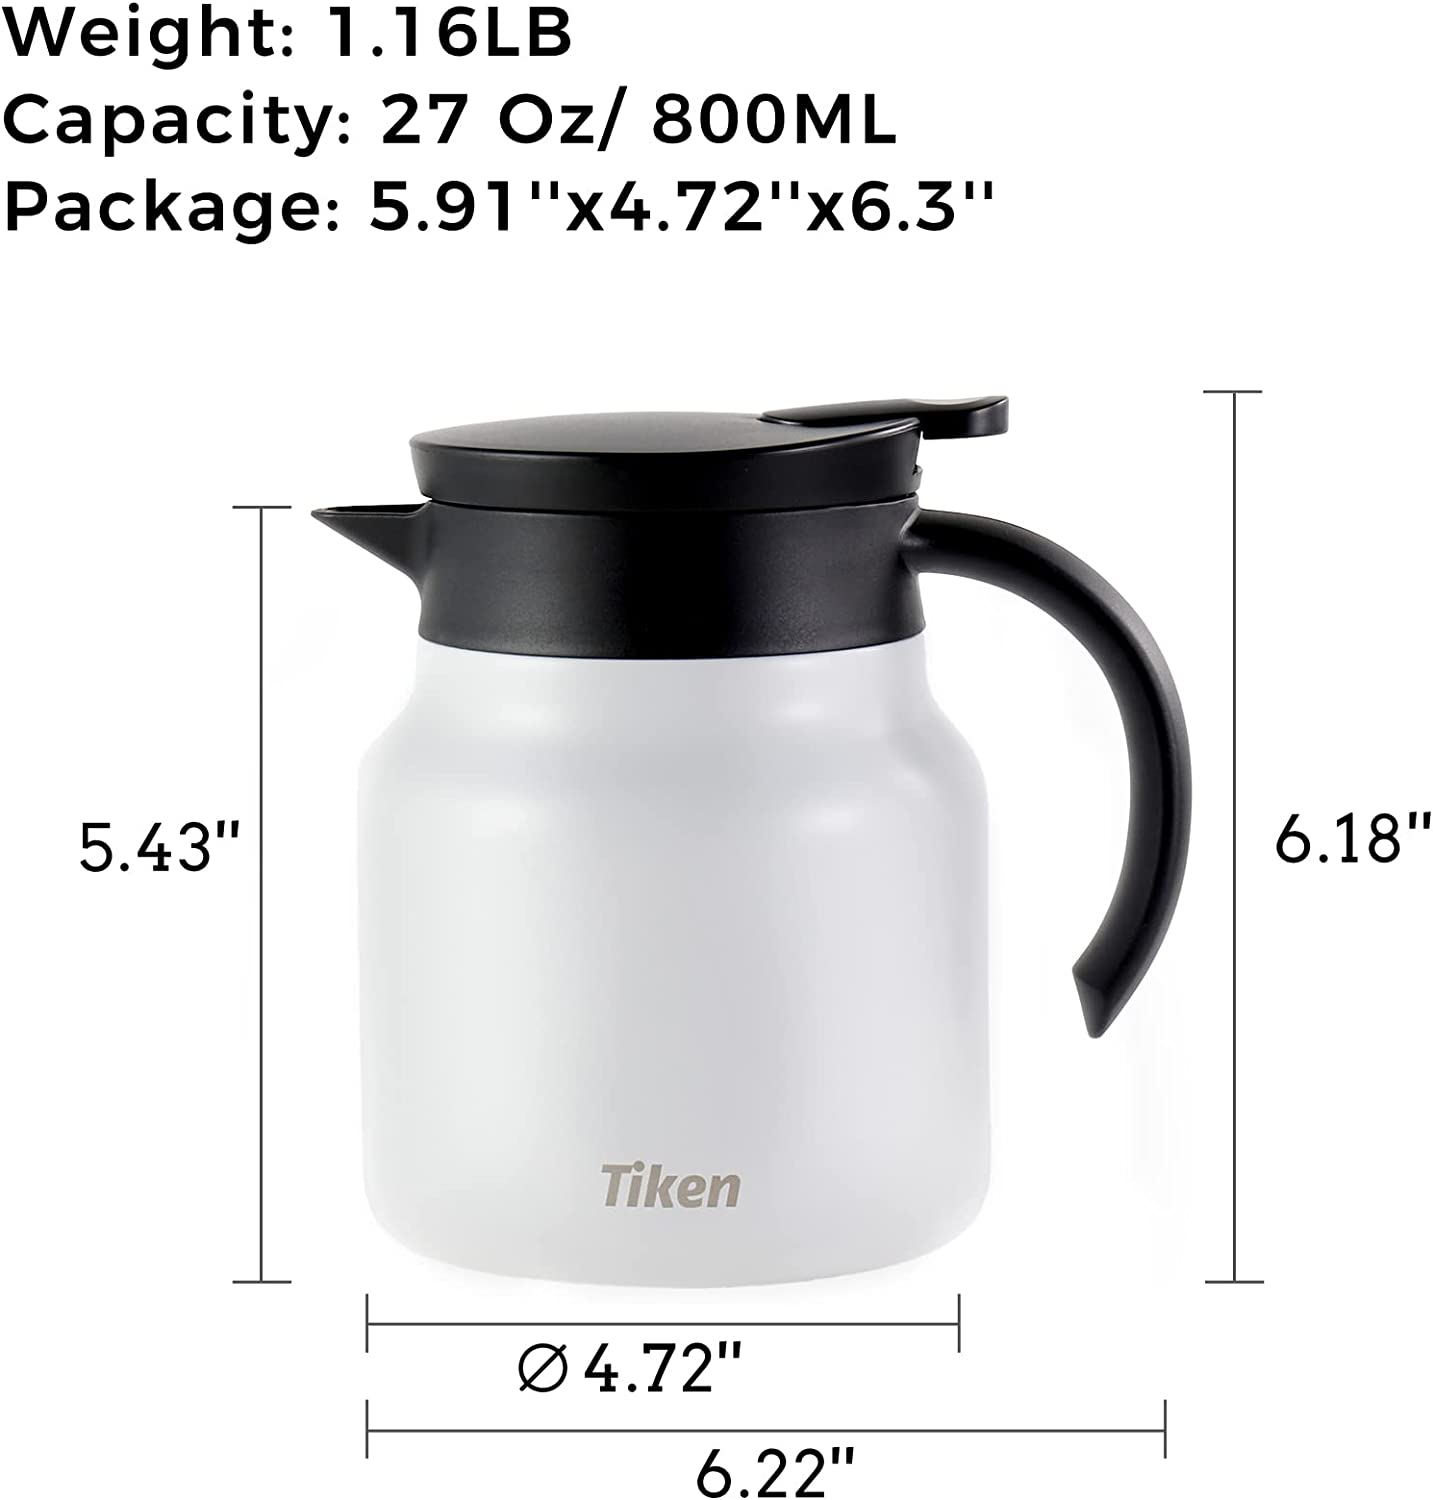 Tiken 27 Oz Thermal Coffee Server Stainless Steel Insulated Vacuum Coffee Carafes, 800ML Beverage Pitcher (White)